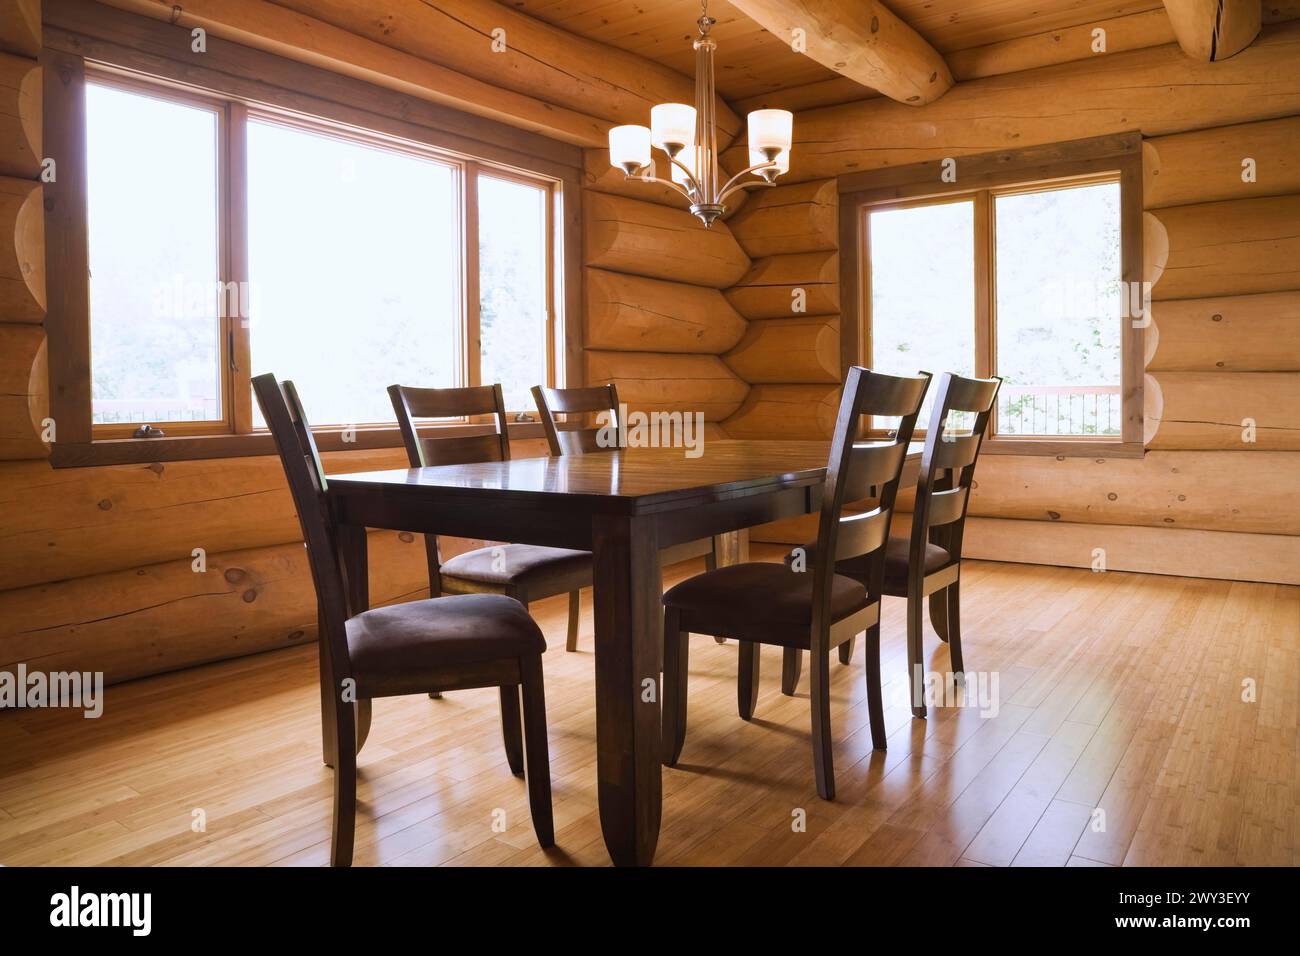 Dark brown stained wooden table and upholstered seat high back chairs in dining room with illuminated chandelier and varnished floor boards inside Stock Photo